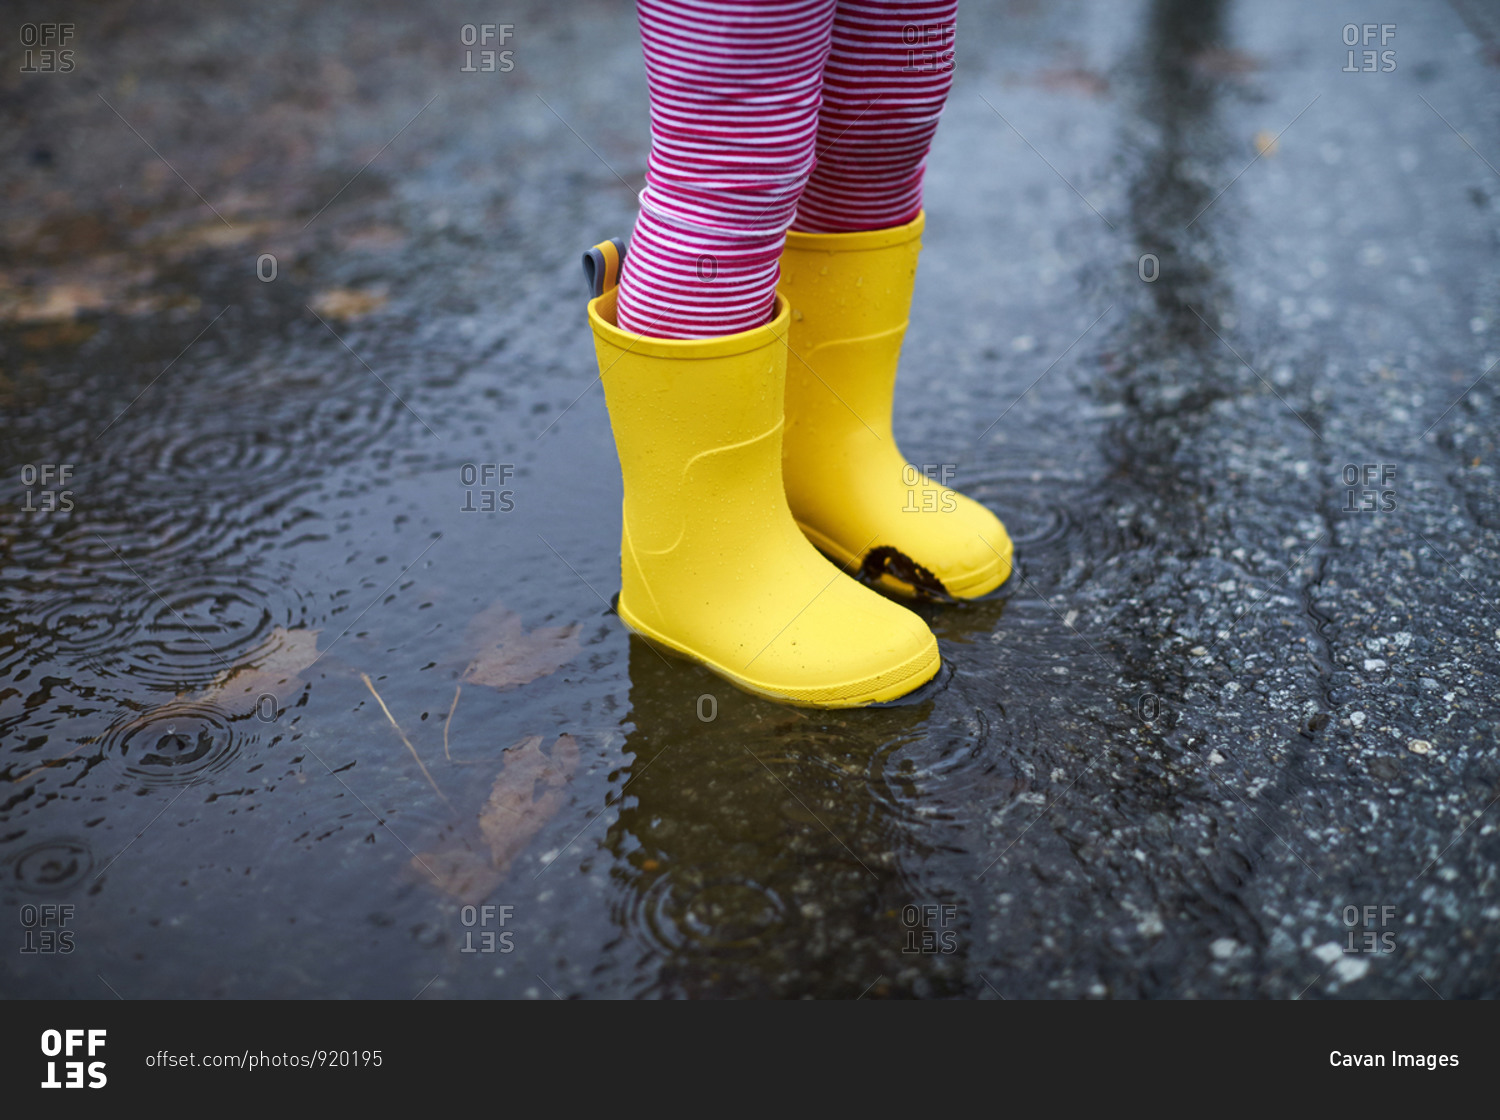 A close of up a child\'s rain boots in a puddle.